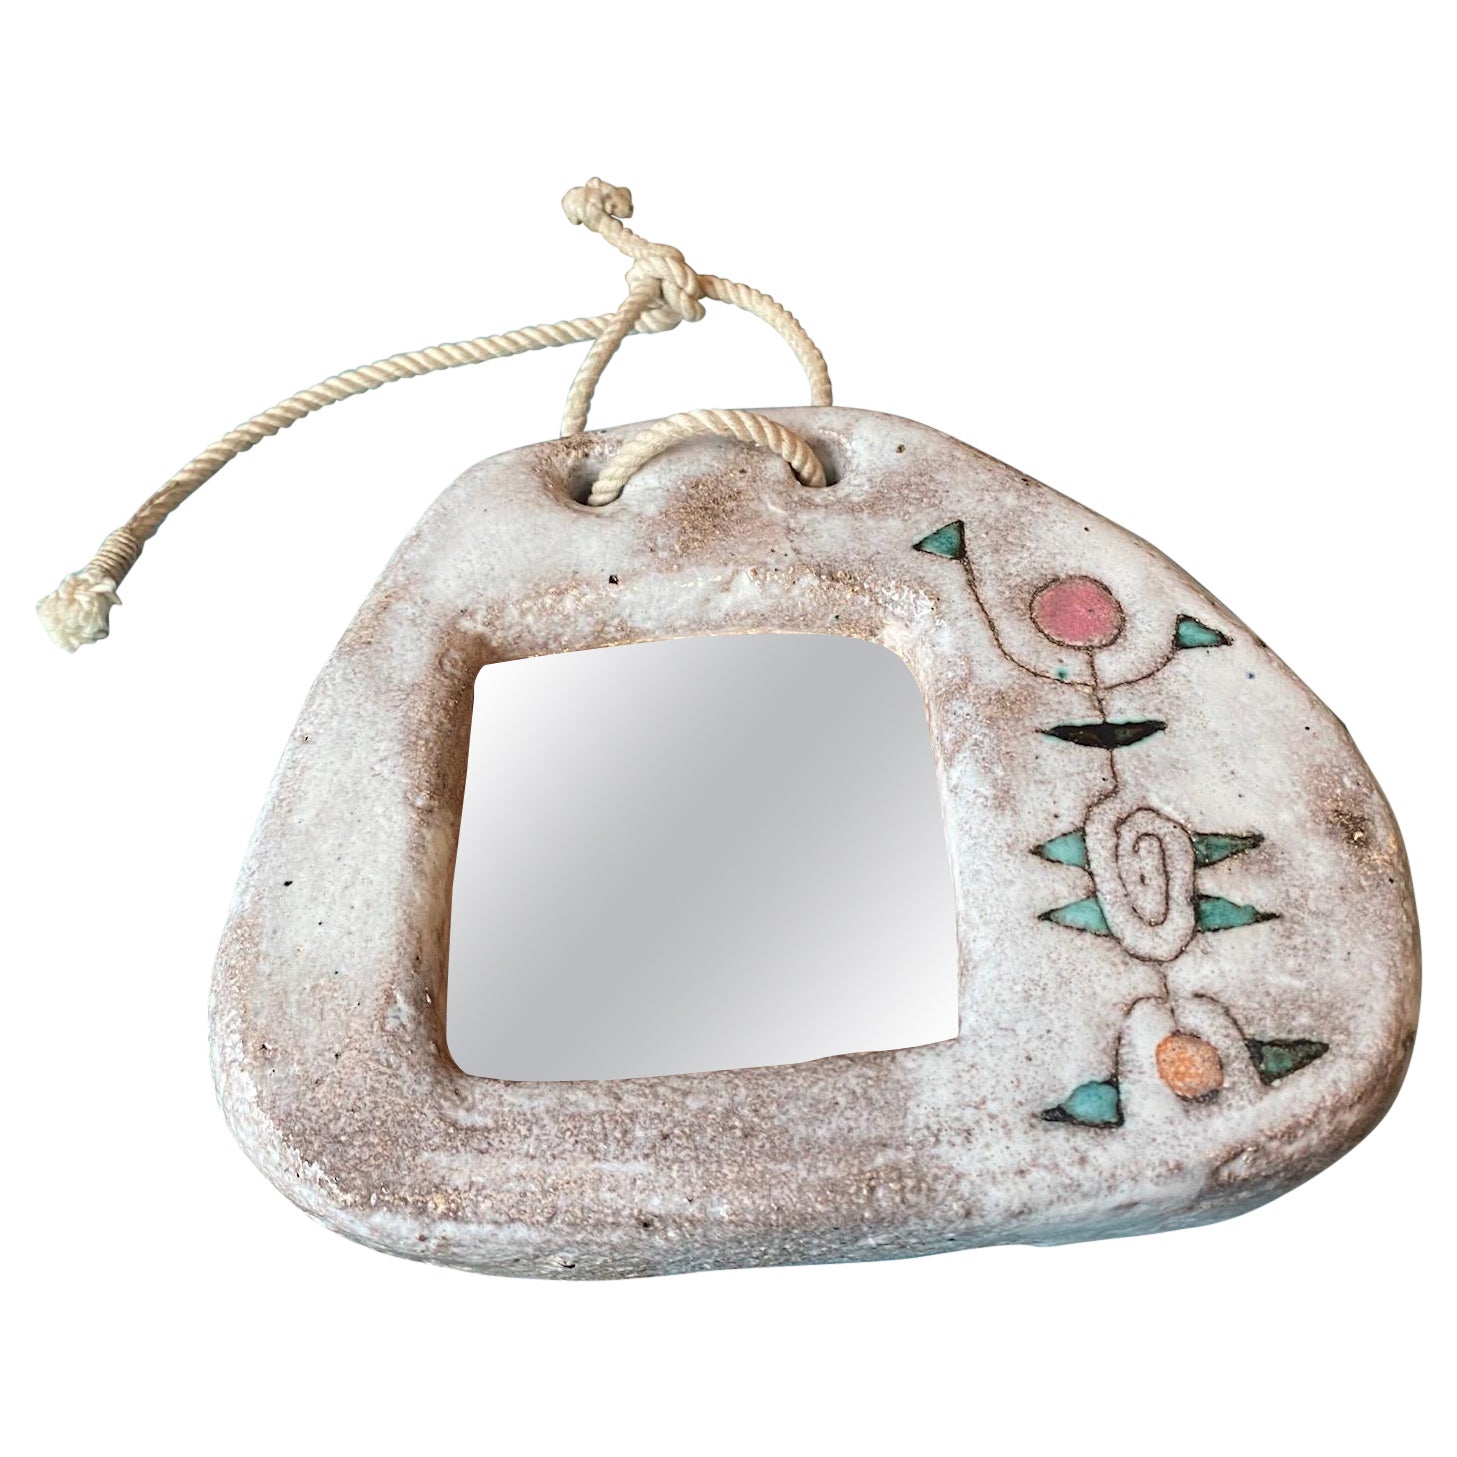 Ceramic Mirror by Jean Rivier, Vallauris, France, 1960s